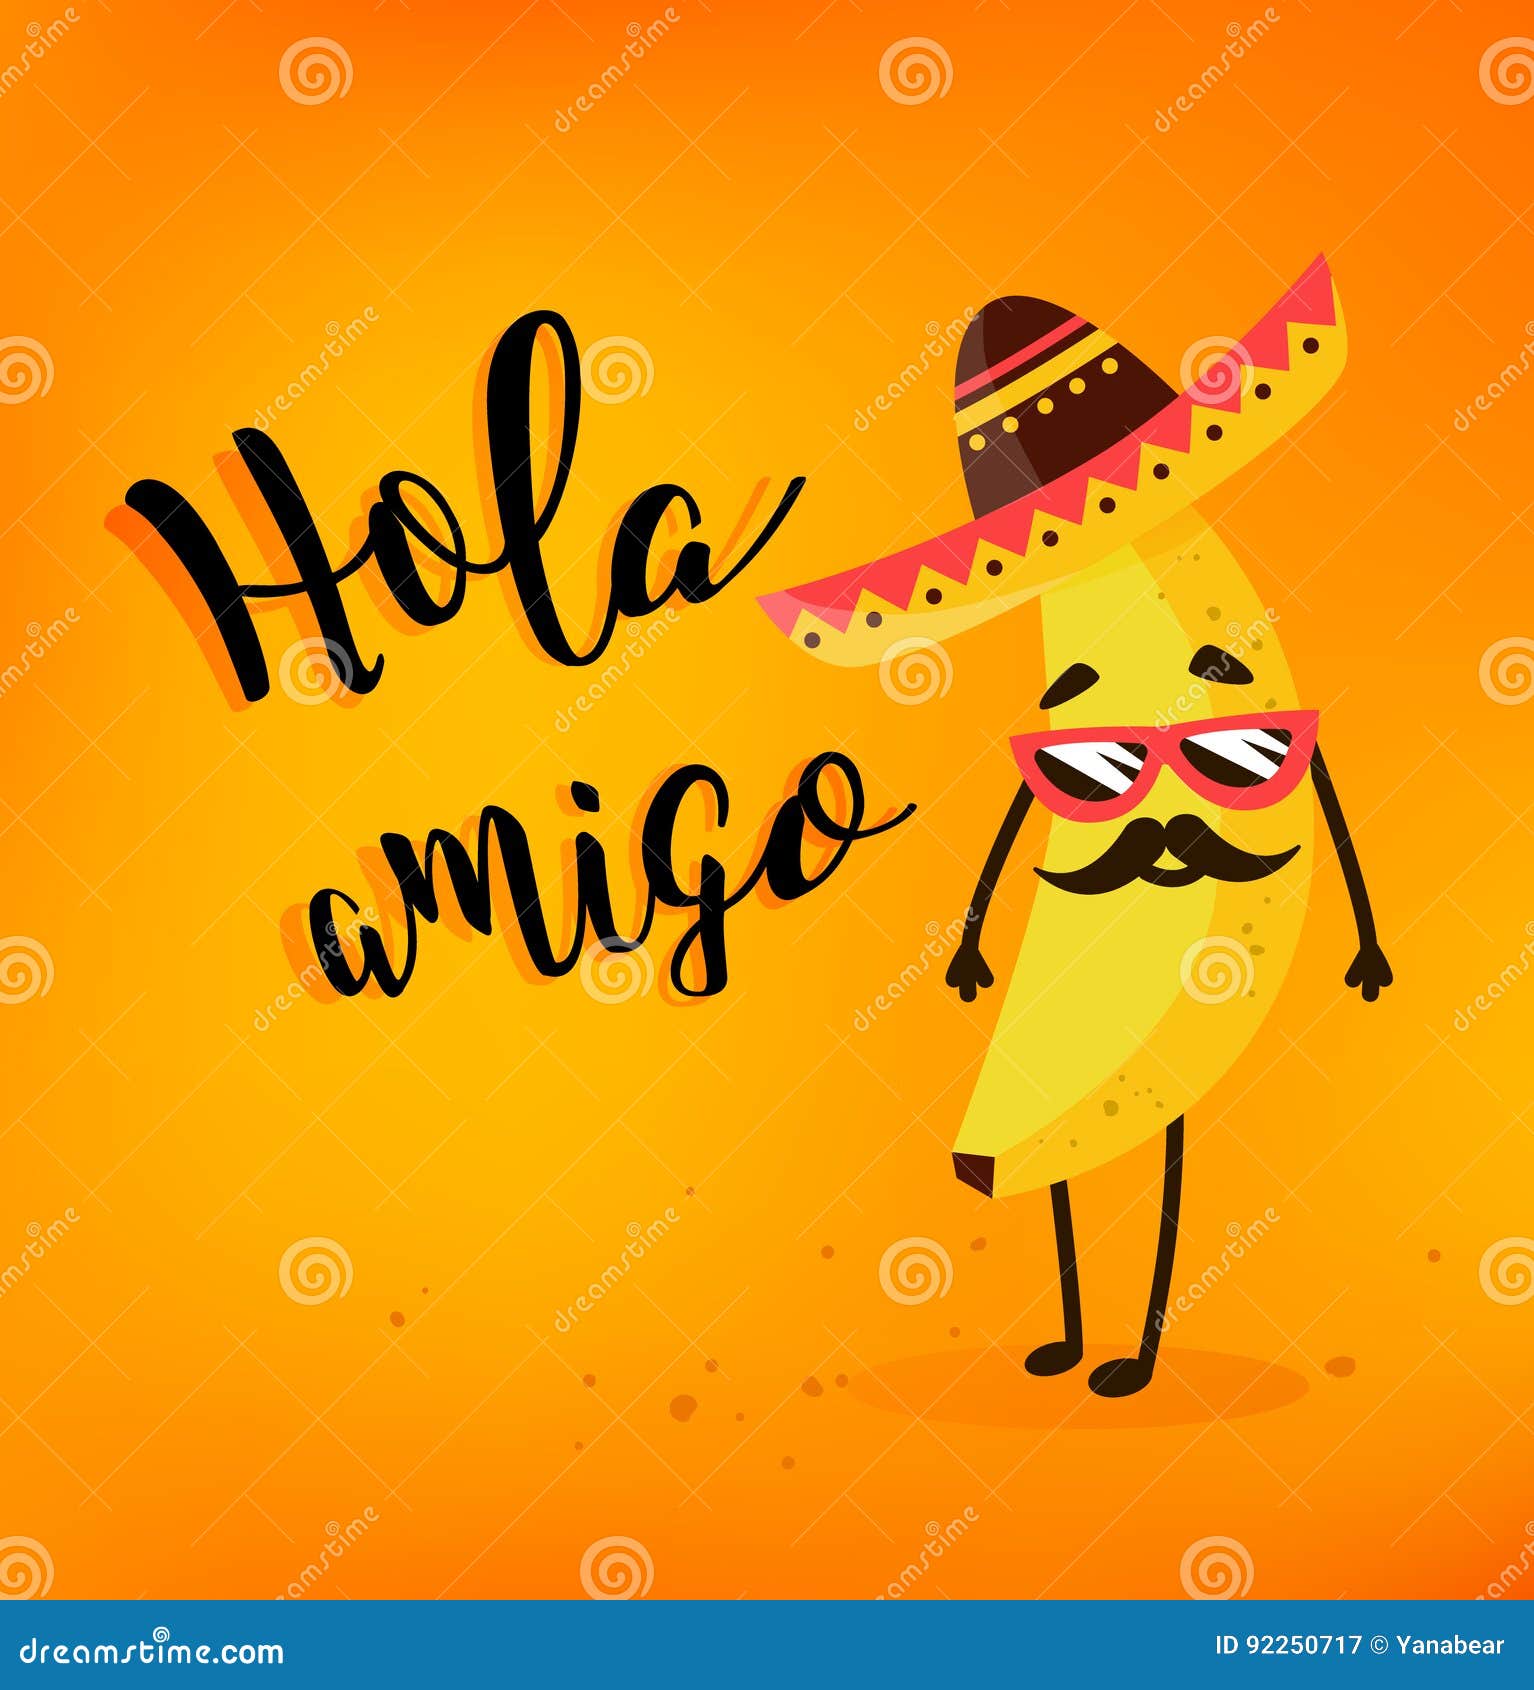 funny cartoon banana in a mexican hat and mustache. hola amigo. summer card. flat style.  